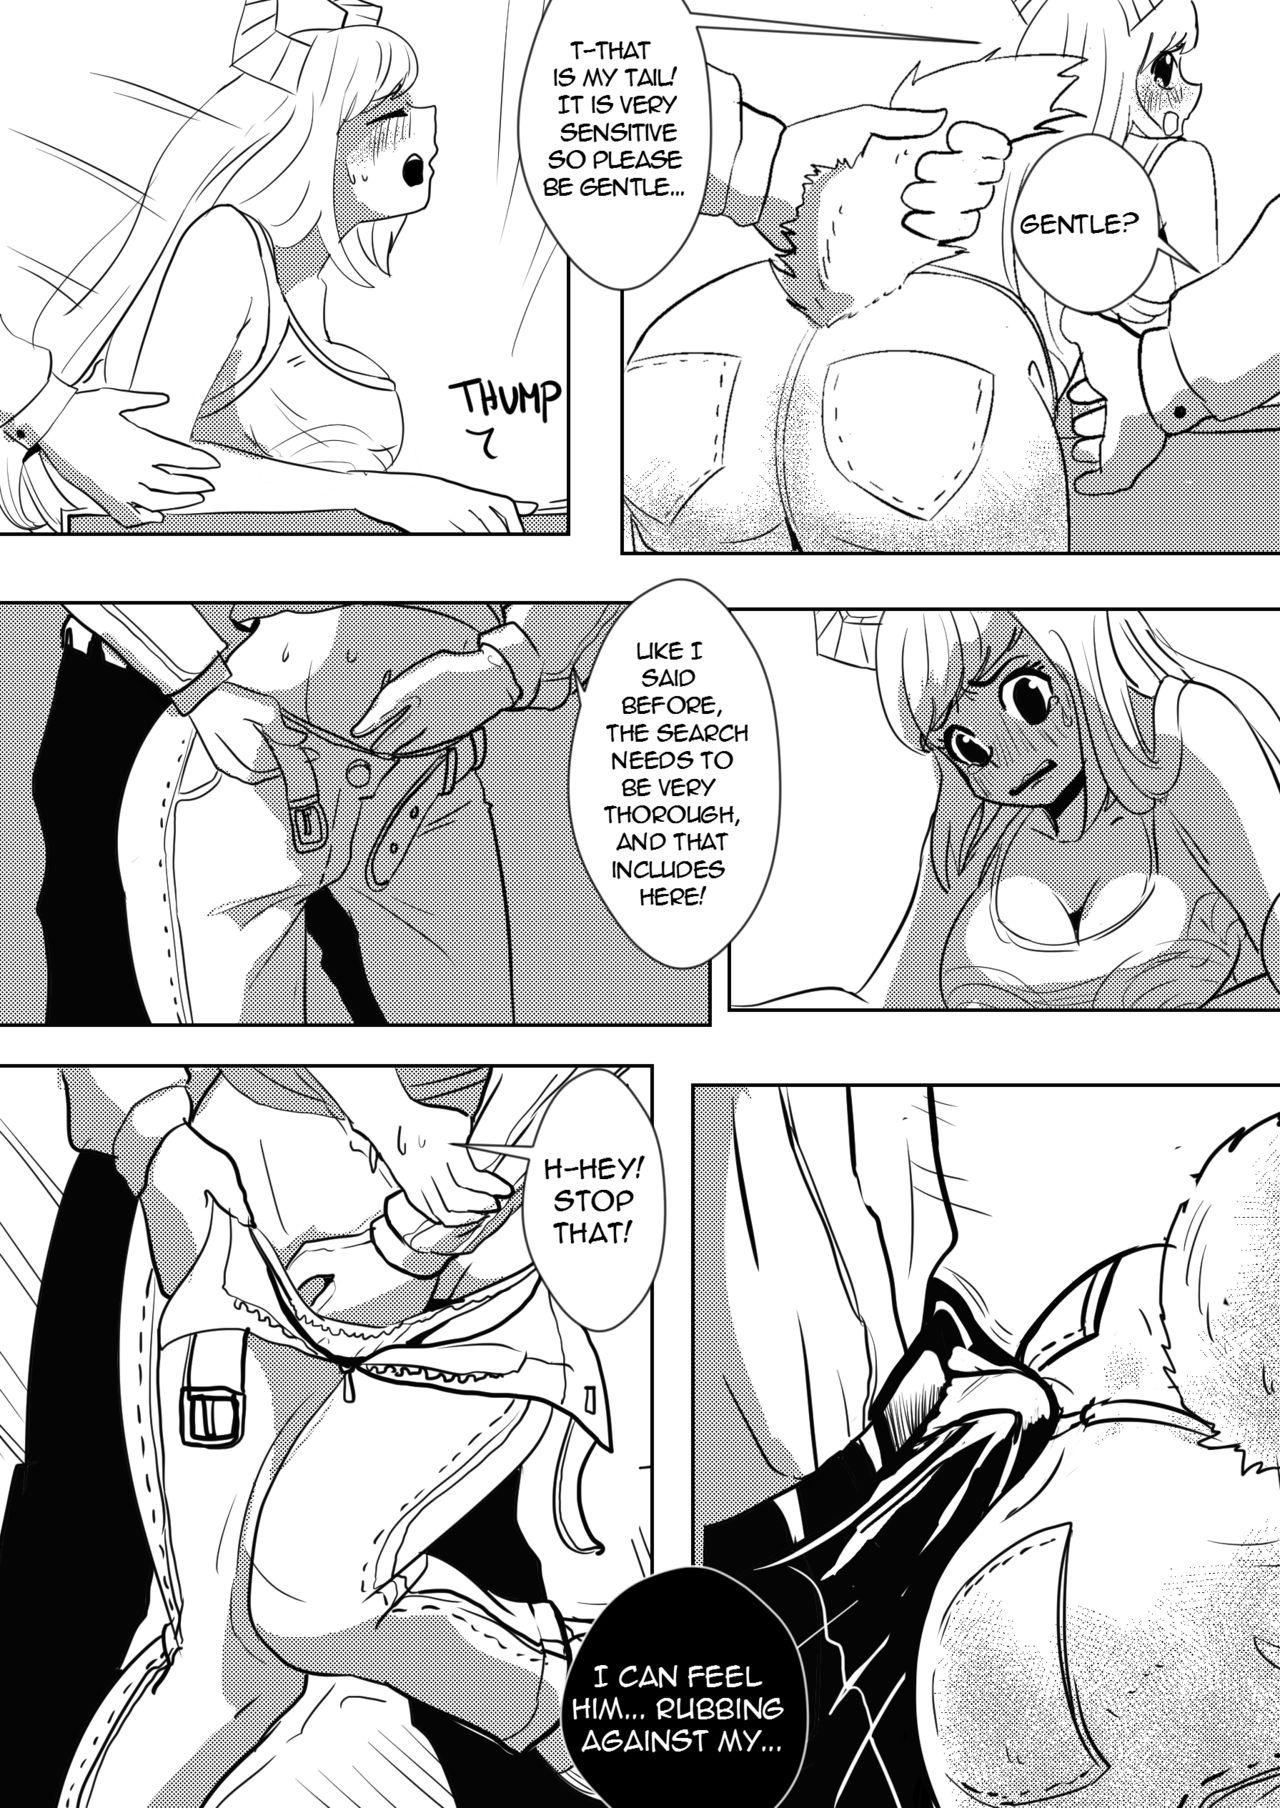 Wetpussy A Hero's Hardships - Part 1: The Arrival - My hero academia Upskirt - Page 4